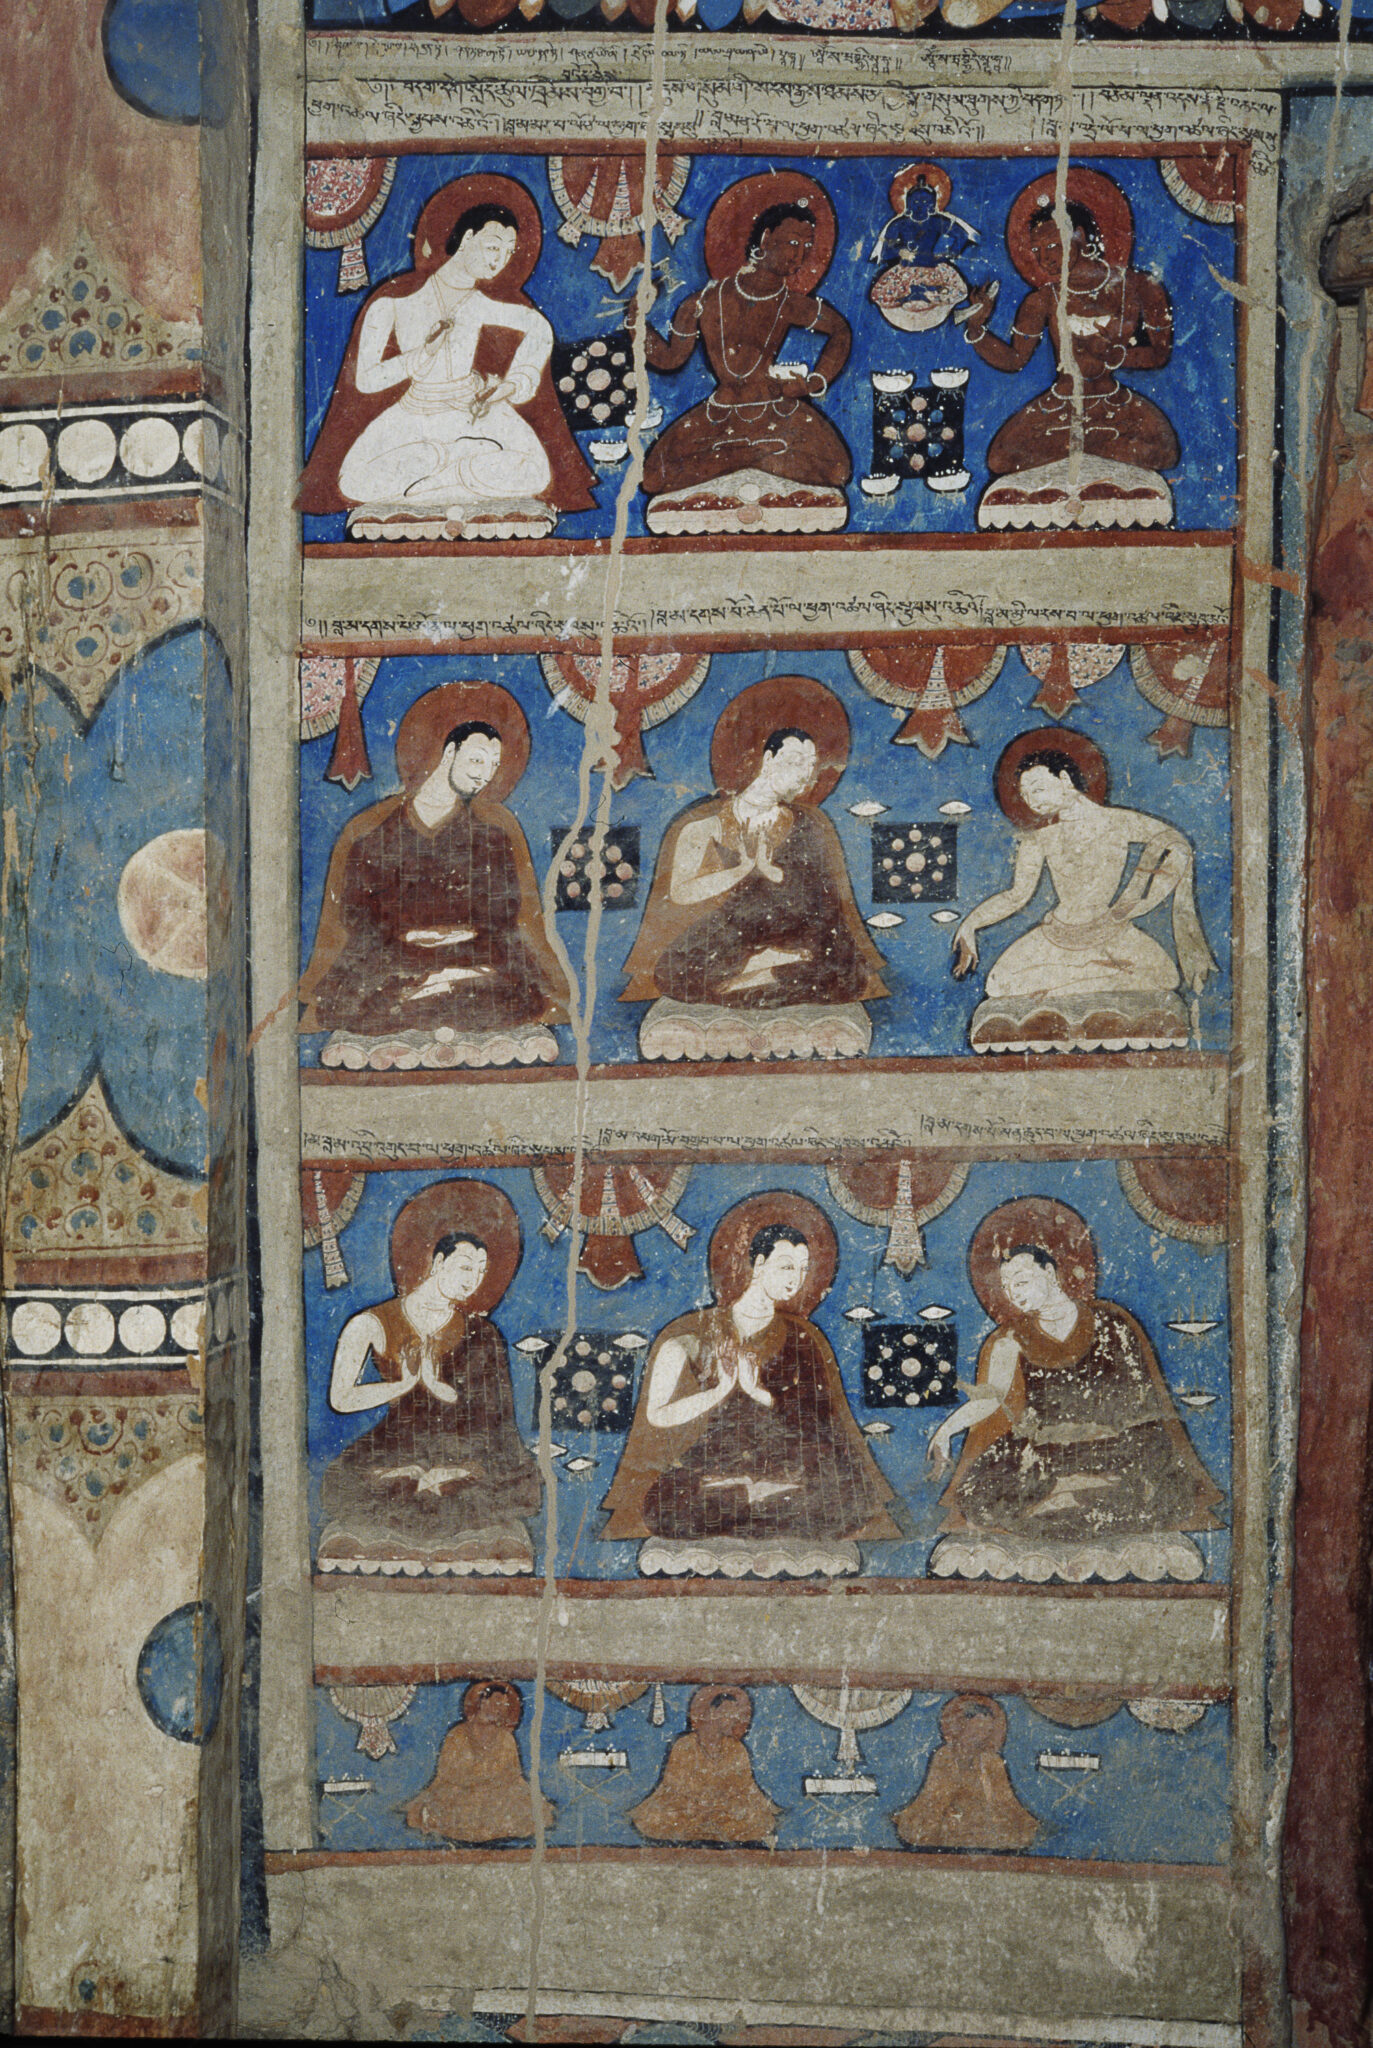 Nine seated figures arranged in three registers against blue backgrounds above bottom row of three stupas